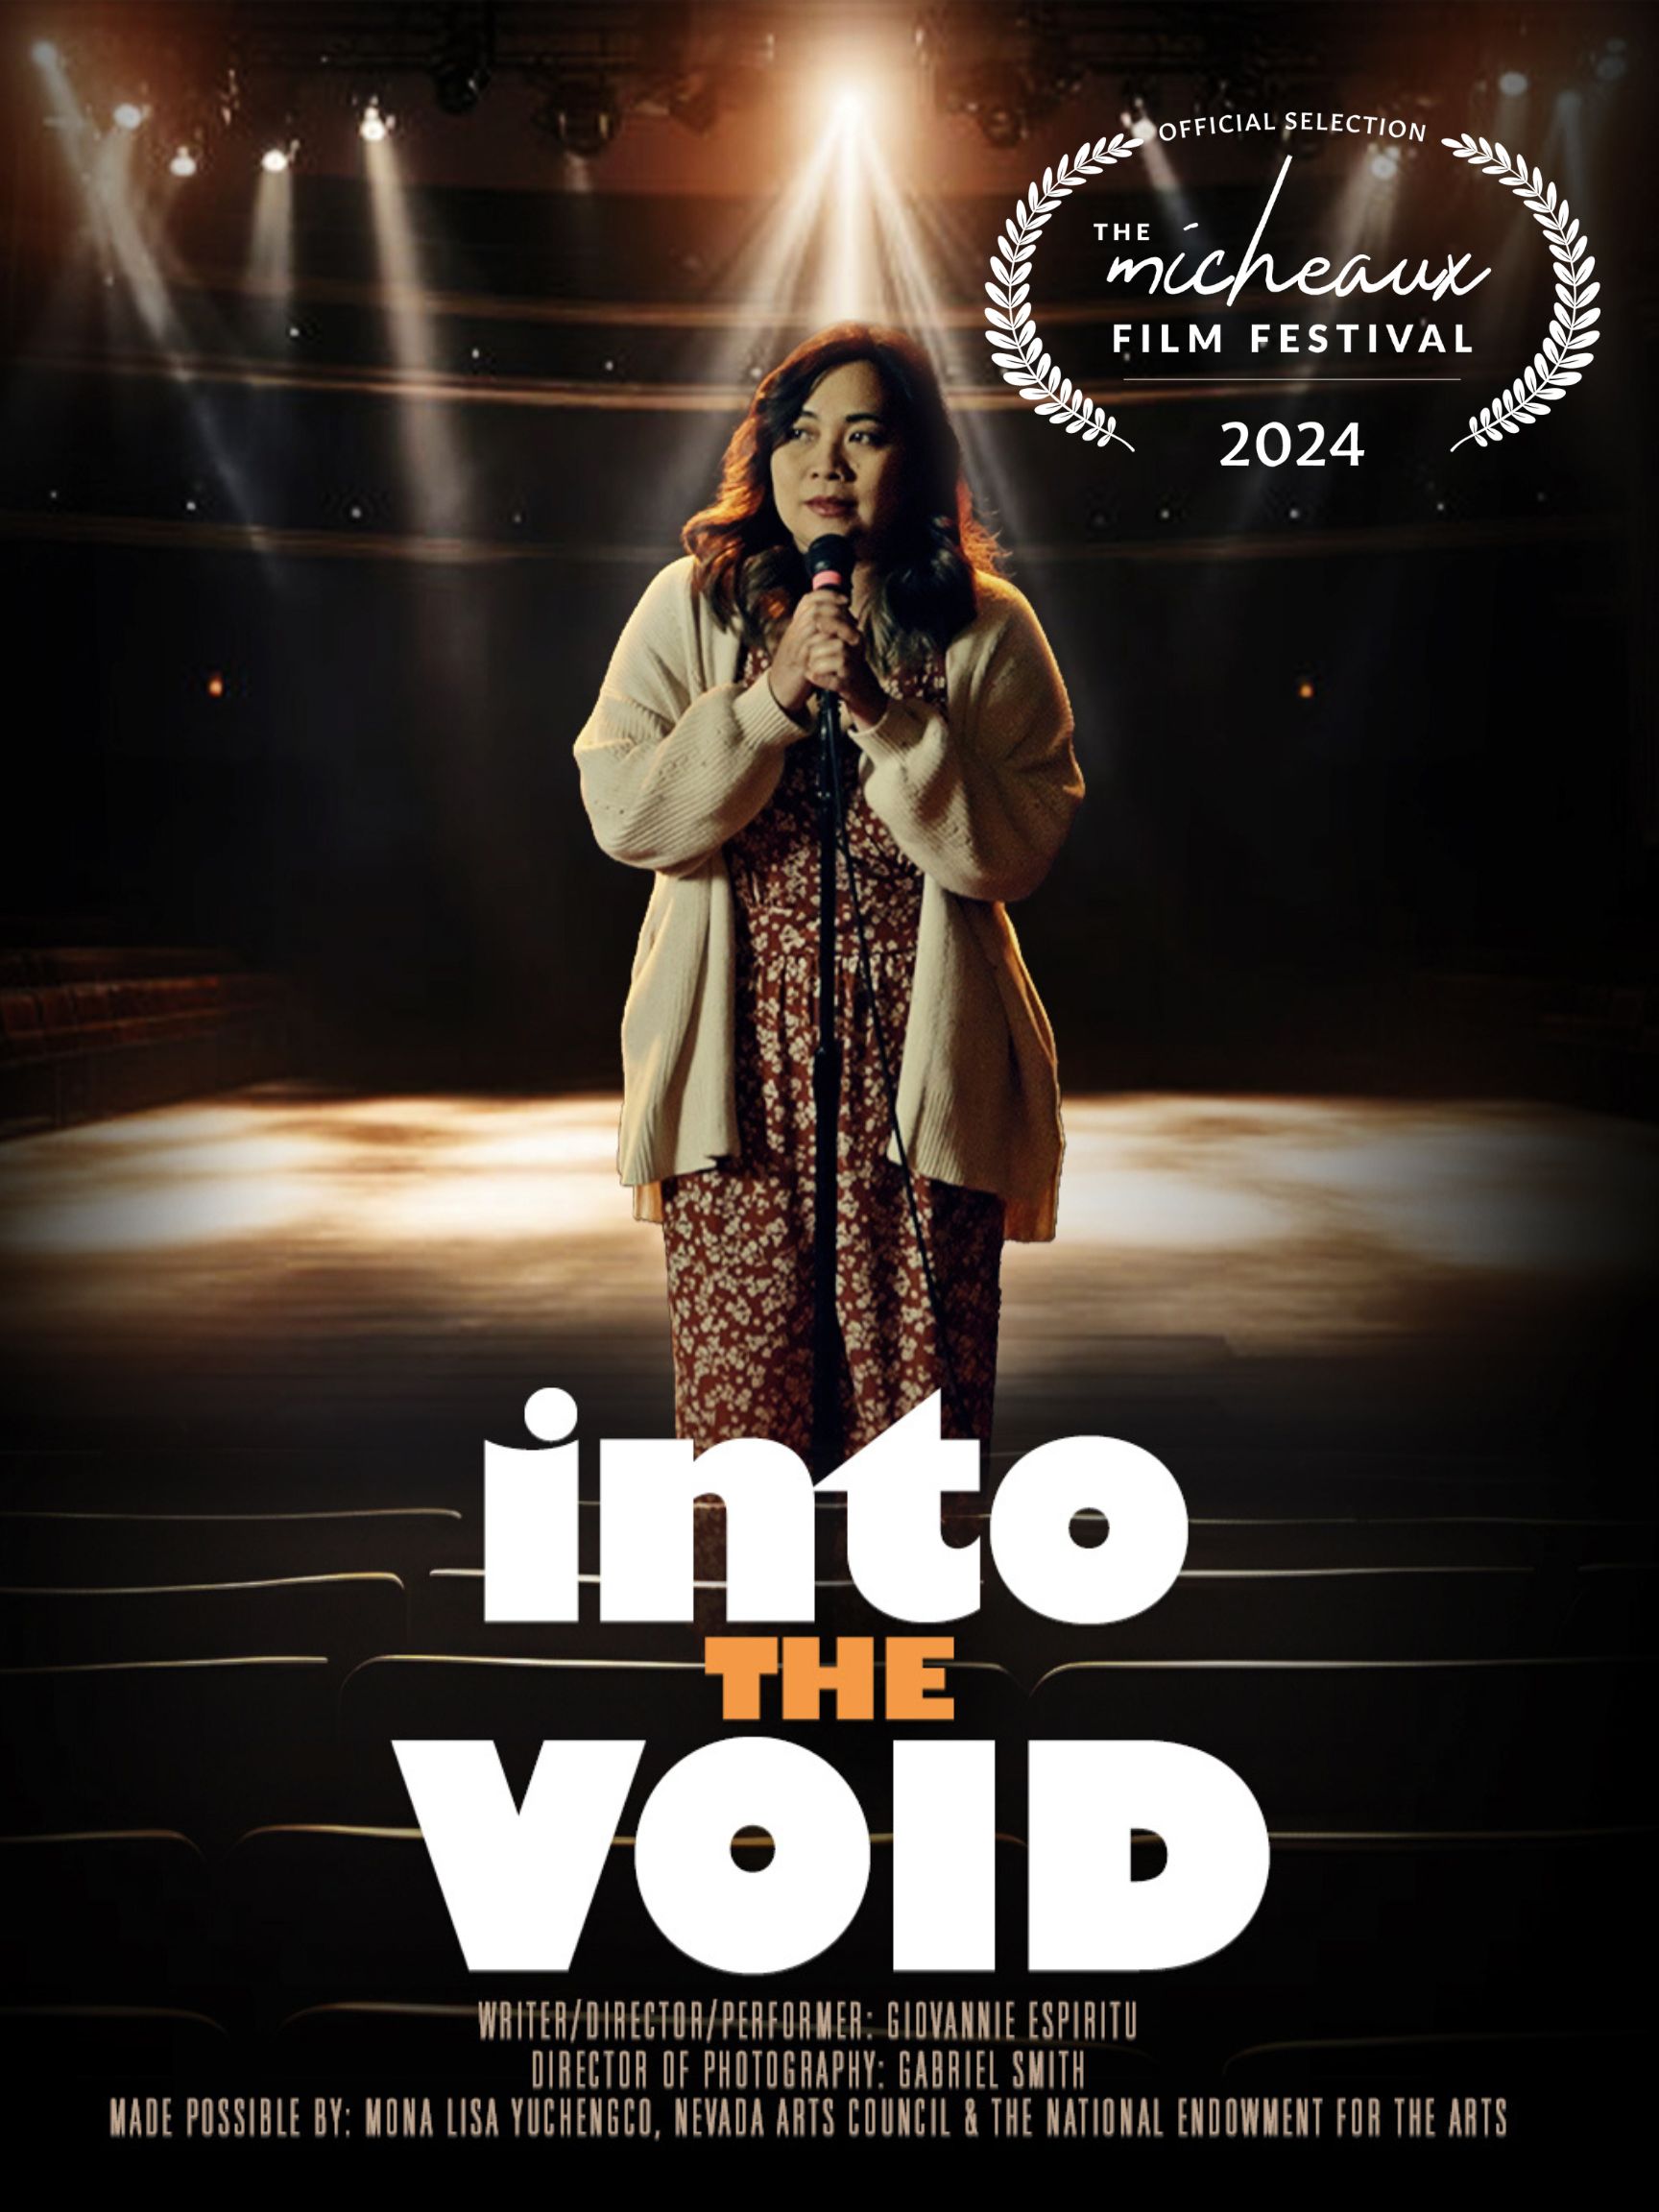 "Into The Void" Directed by Giovannie Espiritu Premieres at the 6th Annual Micheaux Film Festival